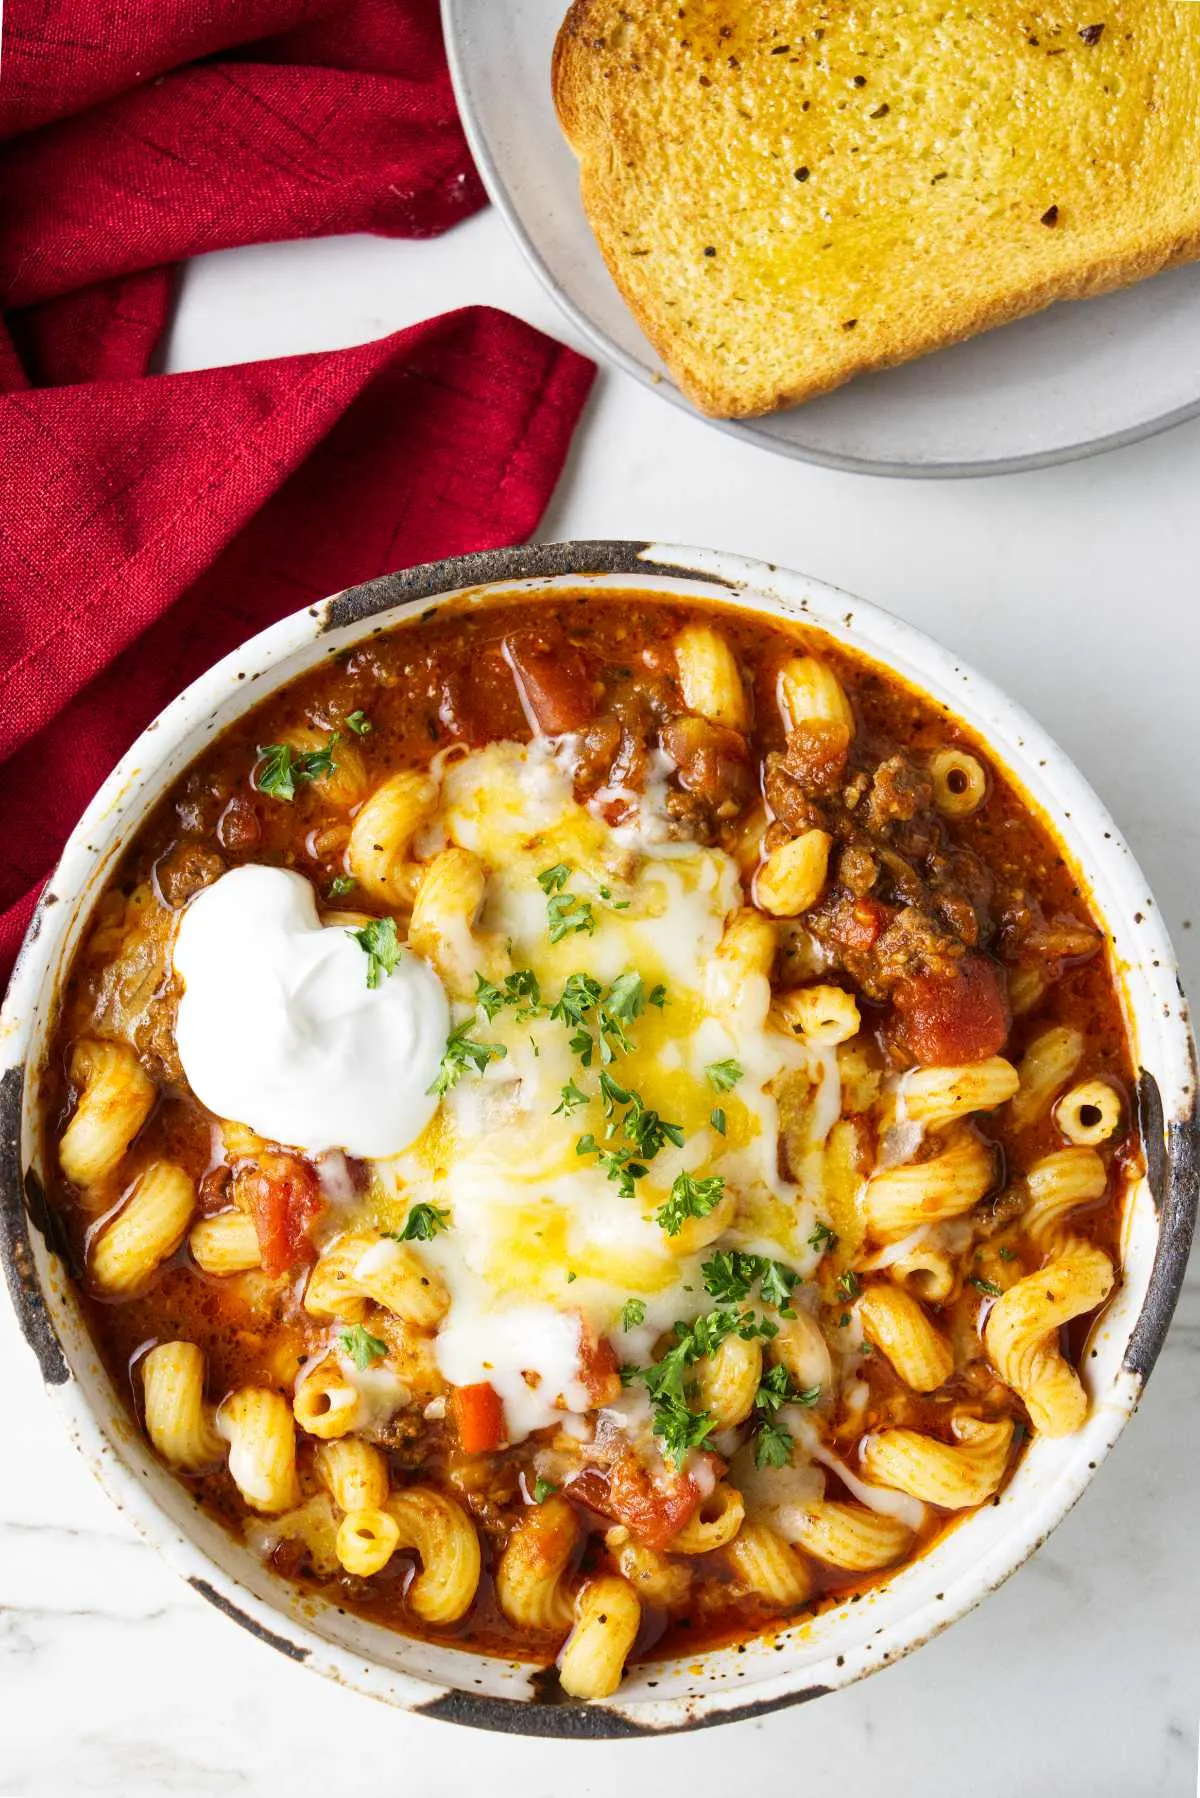 A bowl of American goulash next to a slice of Texas toast.